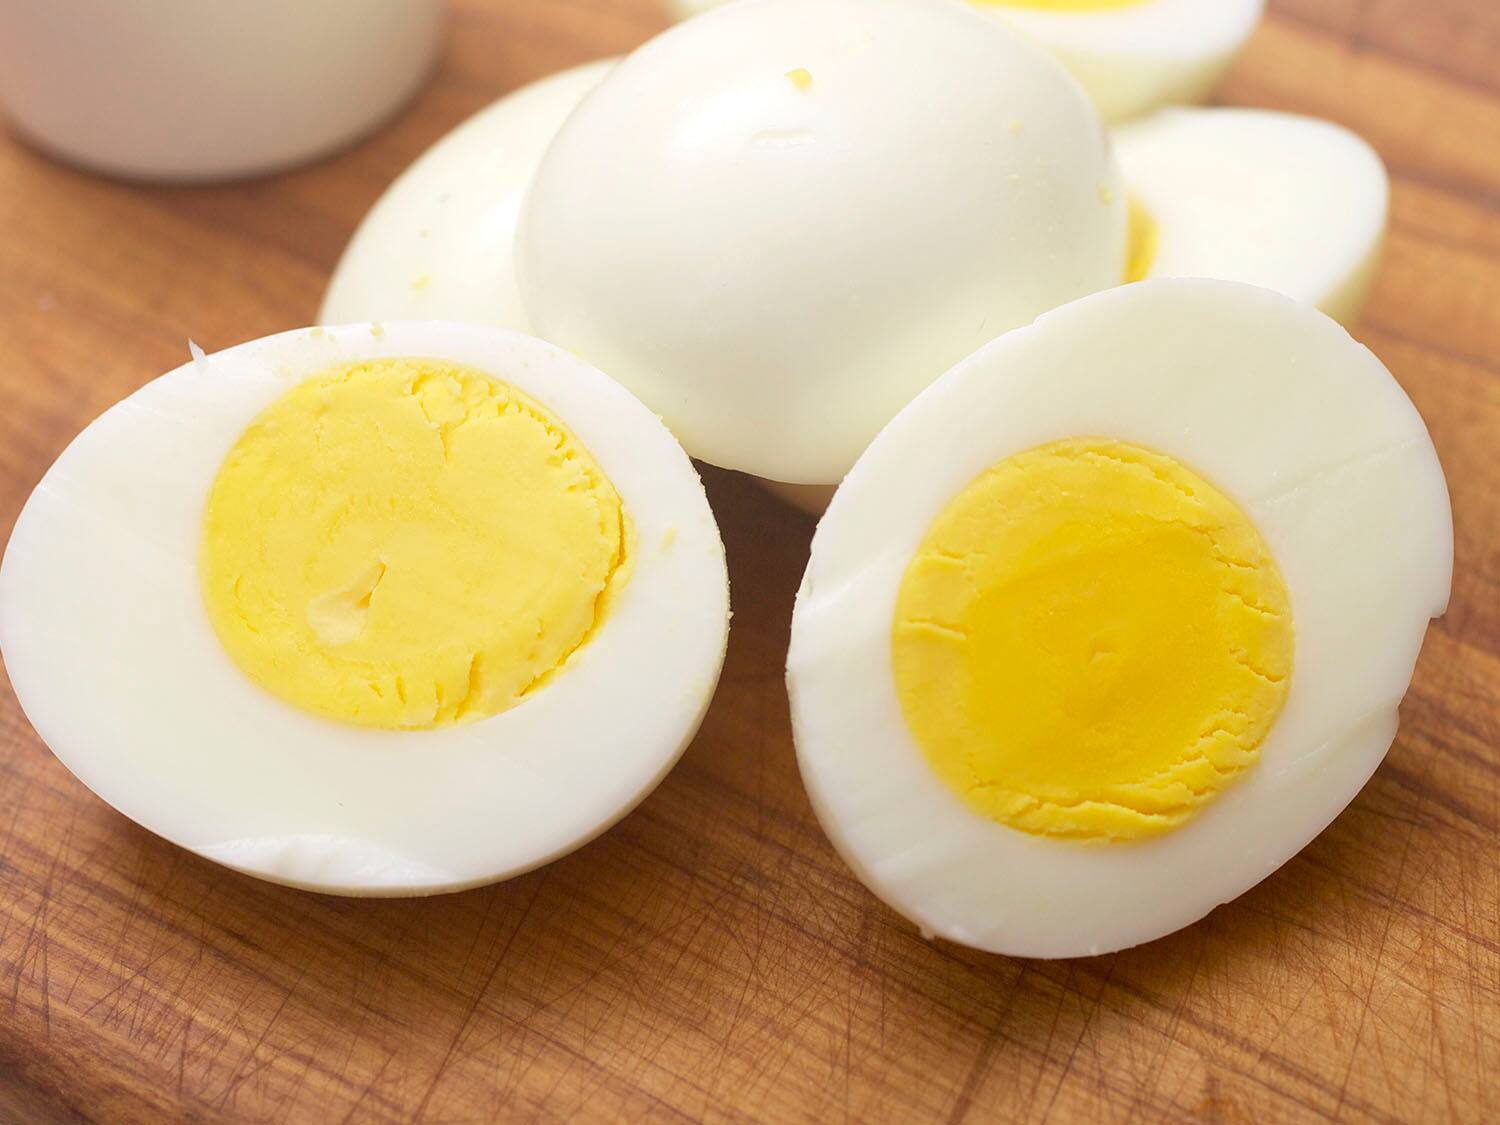 The Colour of The Yolk Tells You This About the Egg